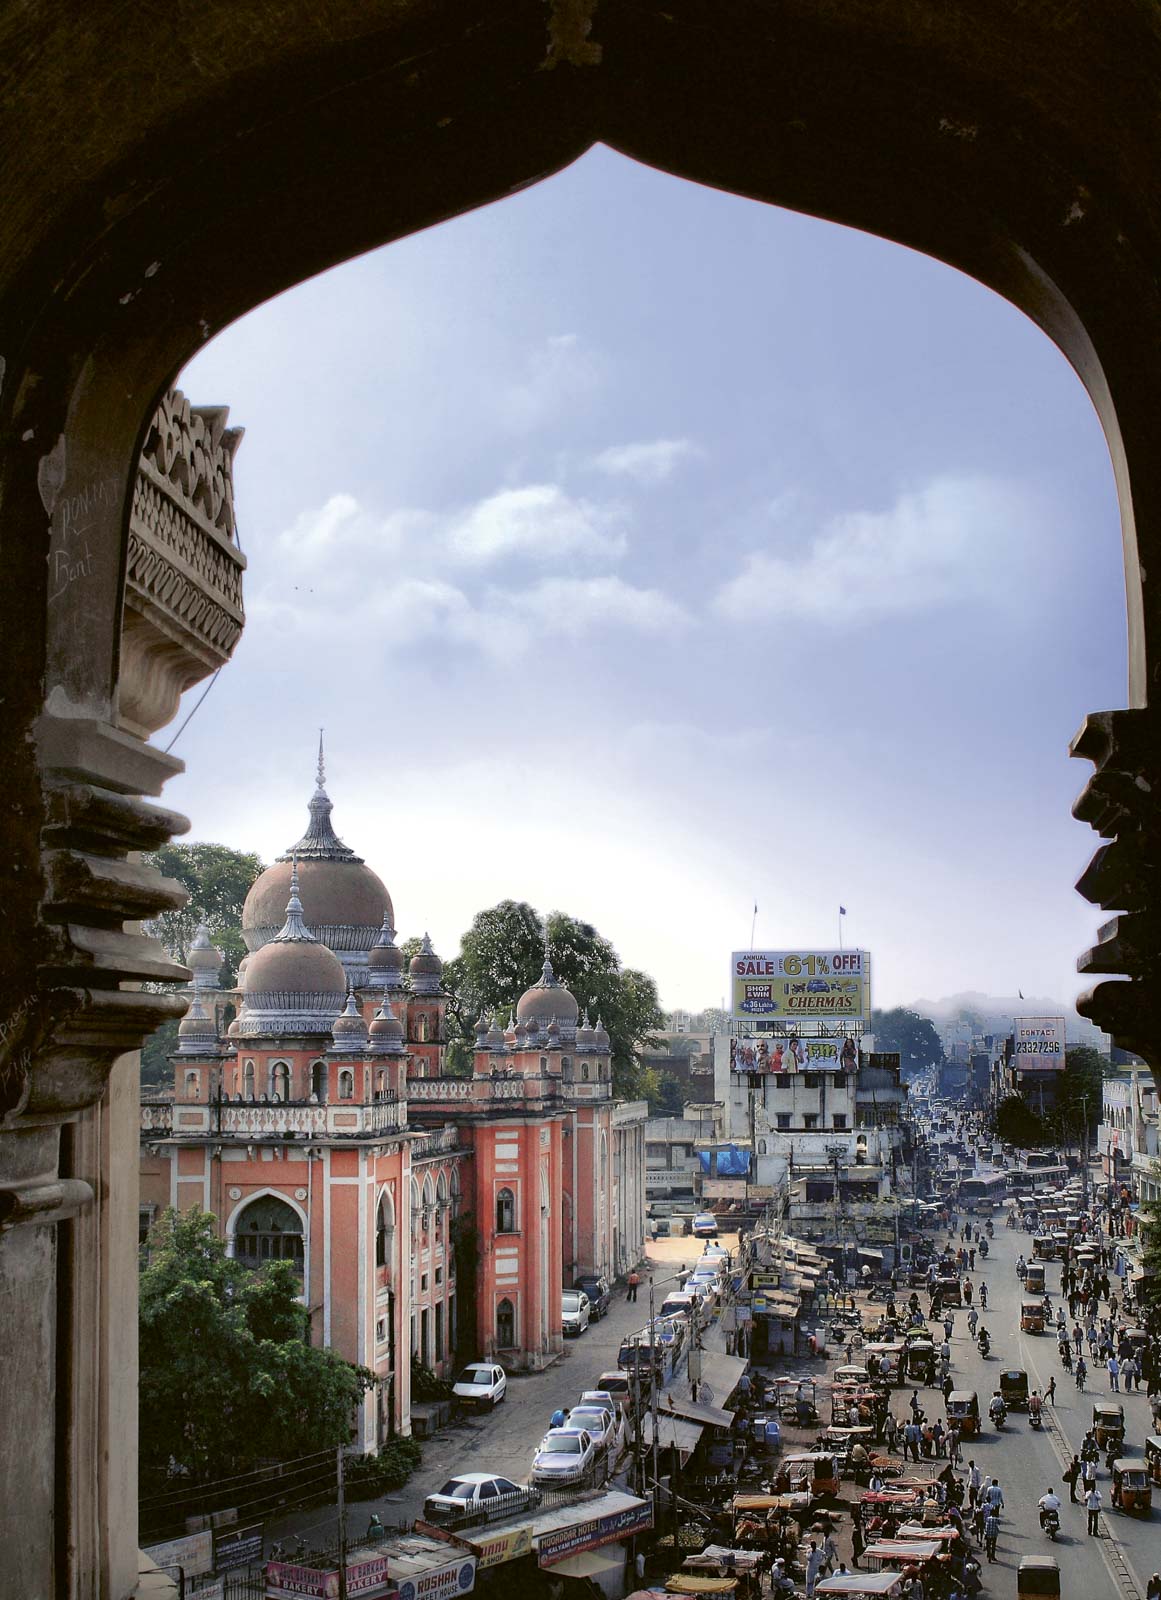 A view from the Charminar